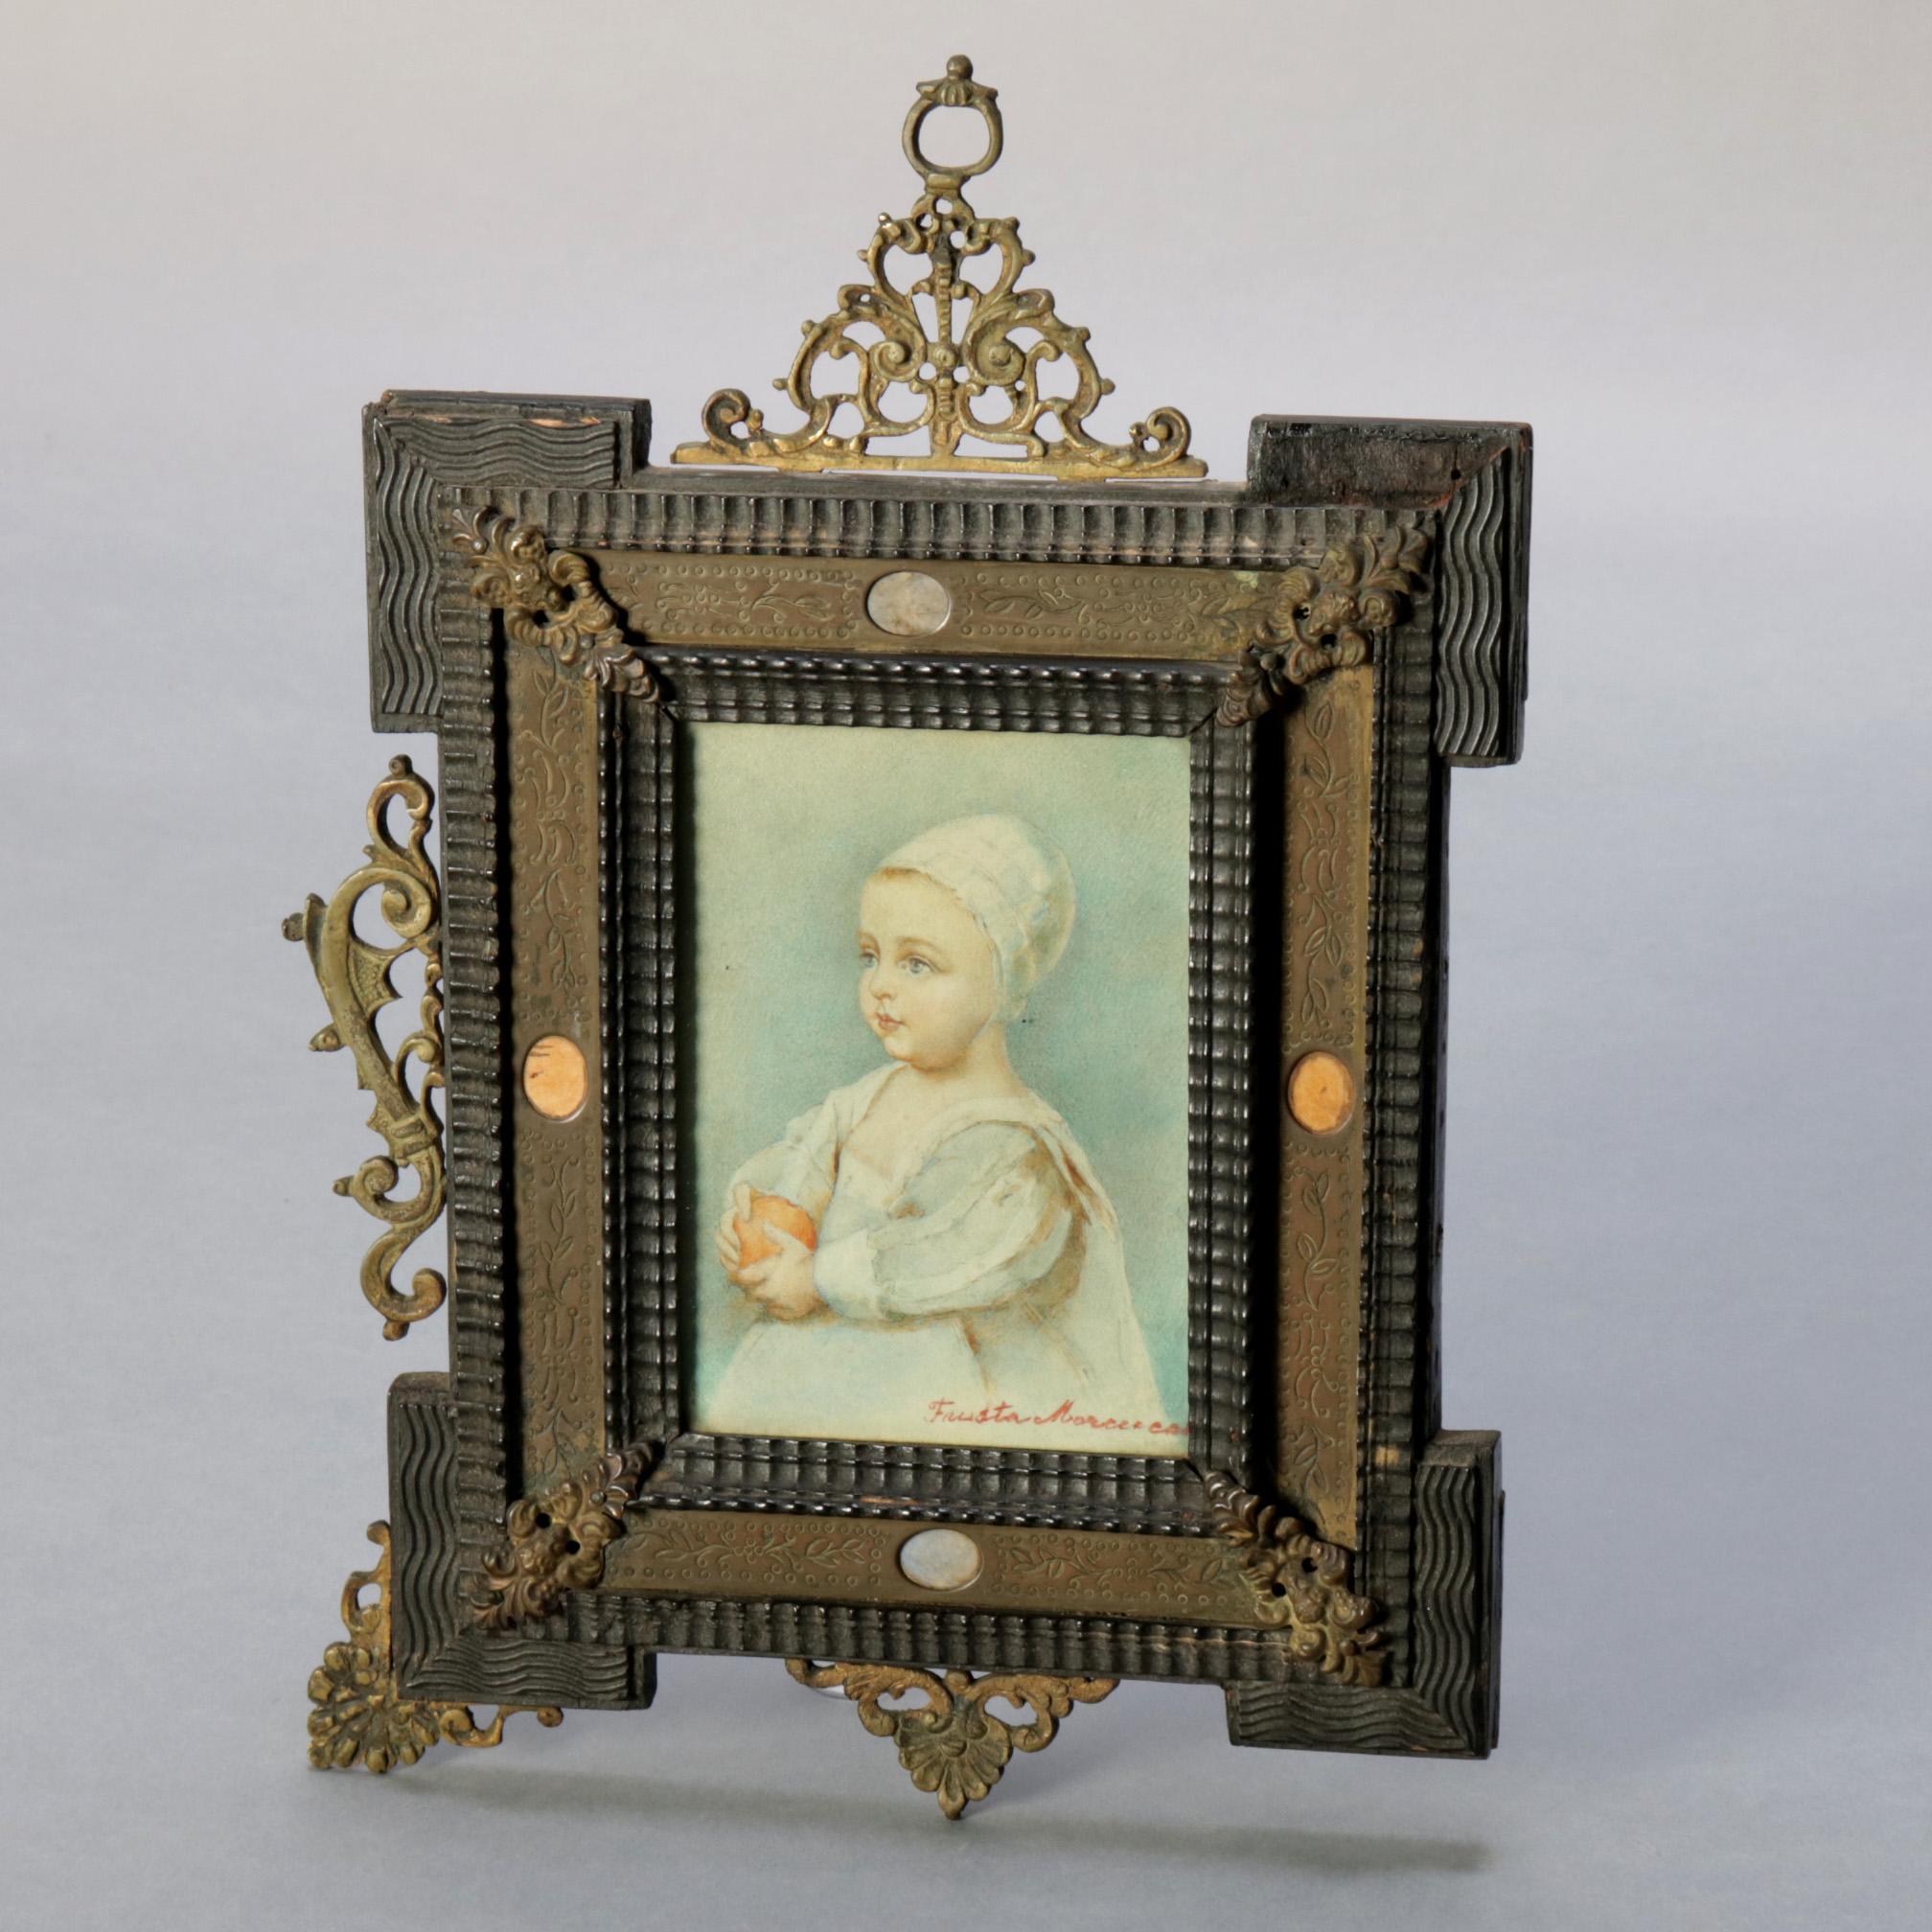 An antique French miniature watercolor painting depicts portrait of a baby and is signed illegible lower right, seated in Folk Art carved wood frame with floral incised inset and having foliate and scroll cast bronze accoutrements, 19th